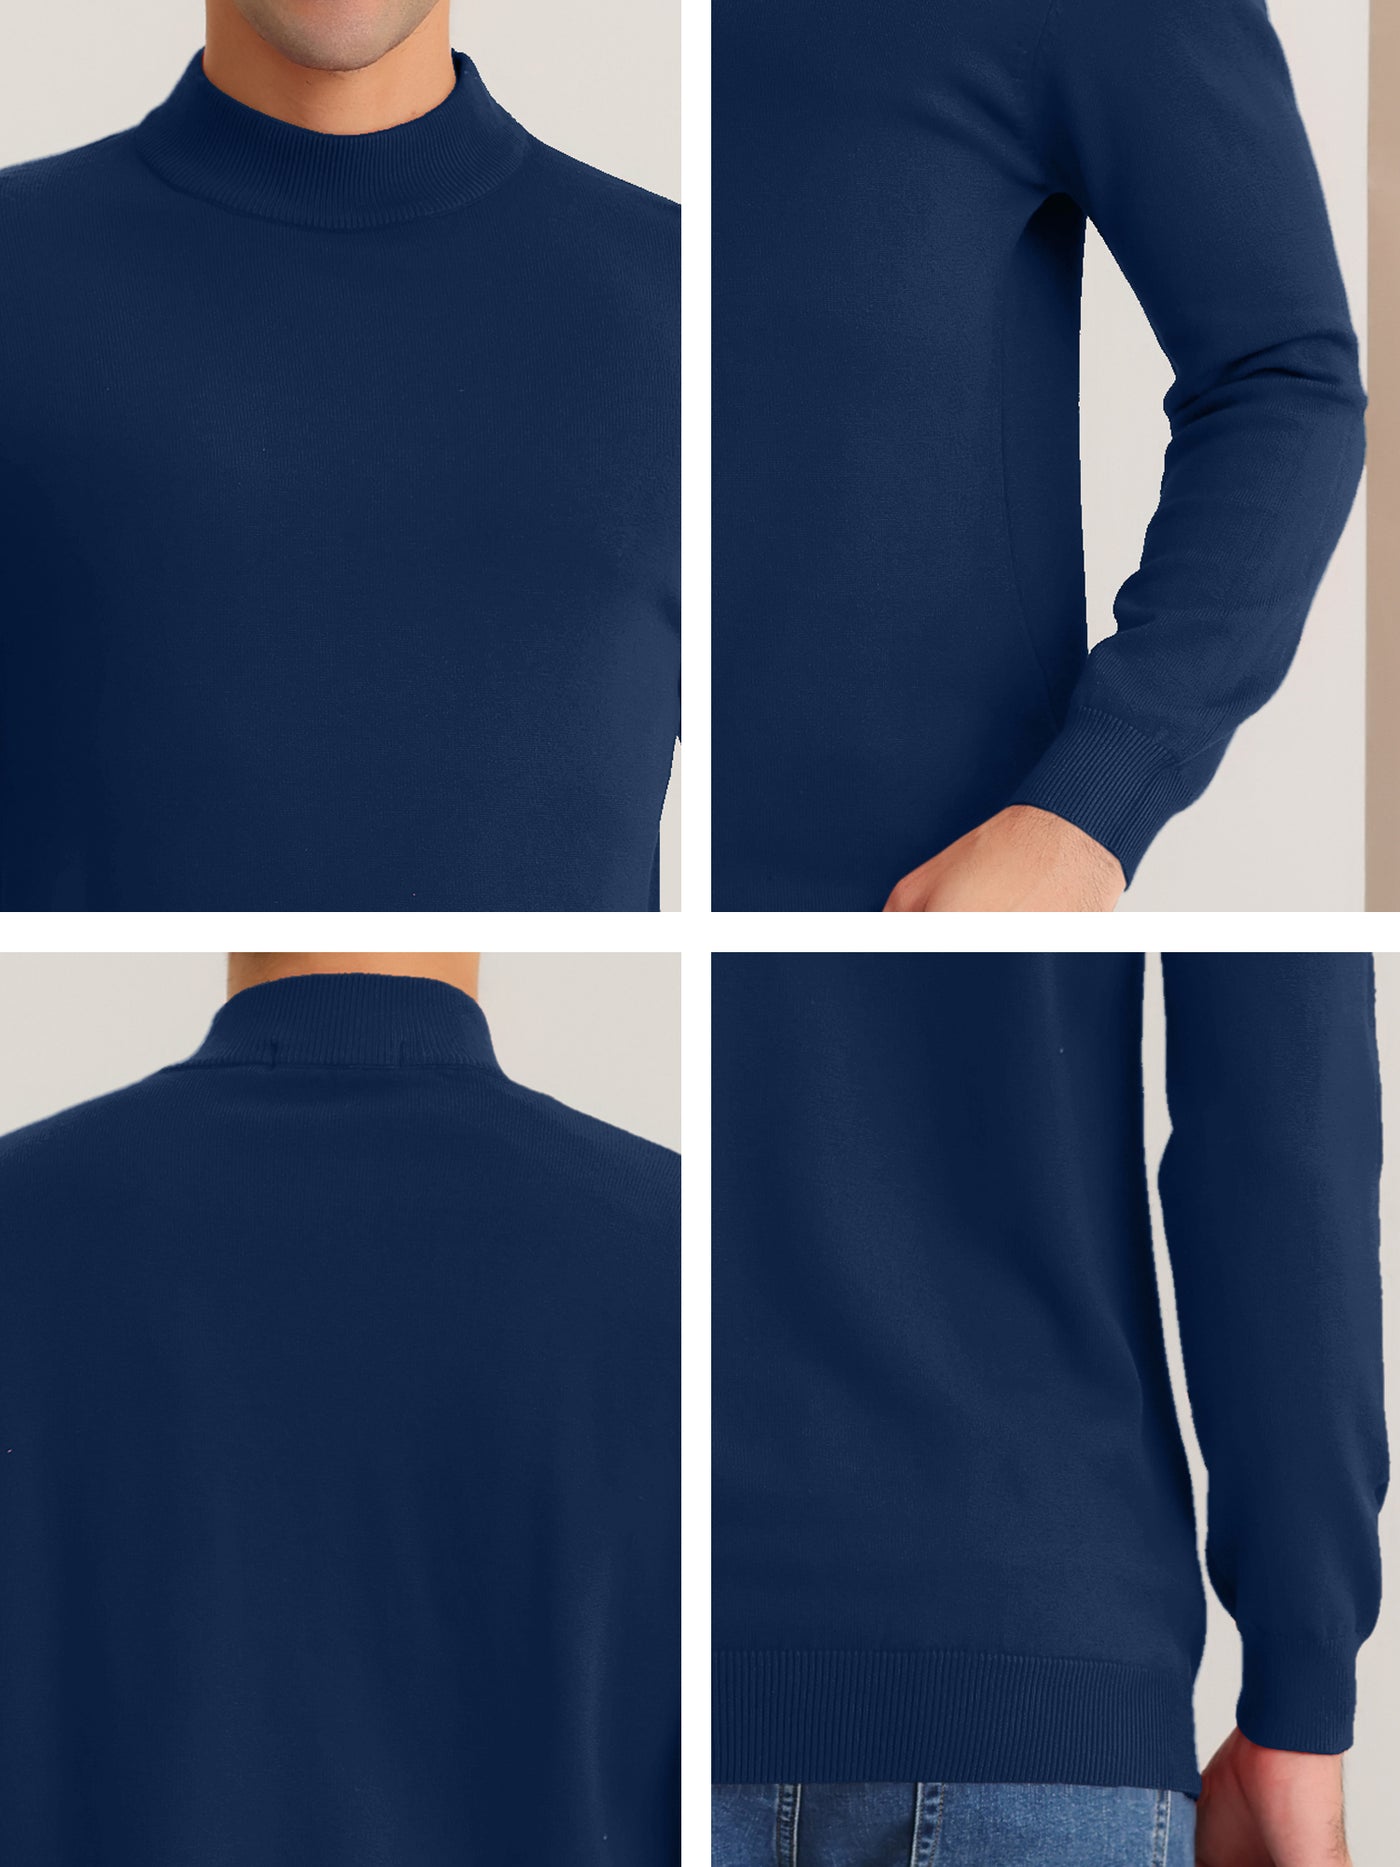 Bublédon Men's Mock Neck Sweater Solid Color Classic Long Sleeves Knit Pullover